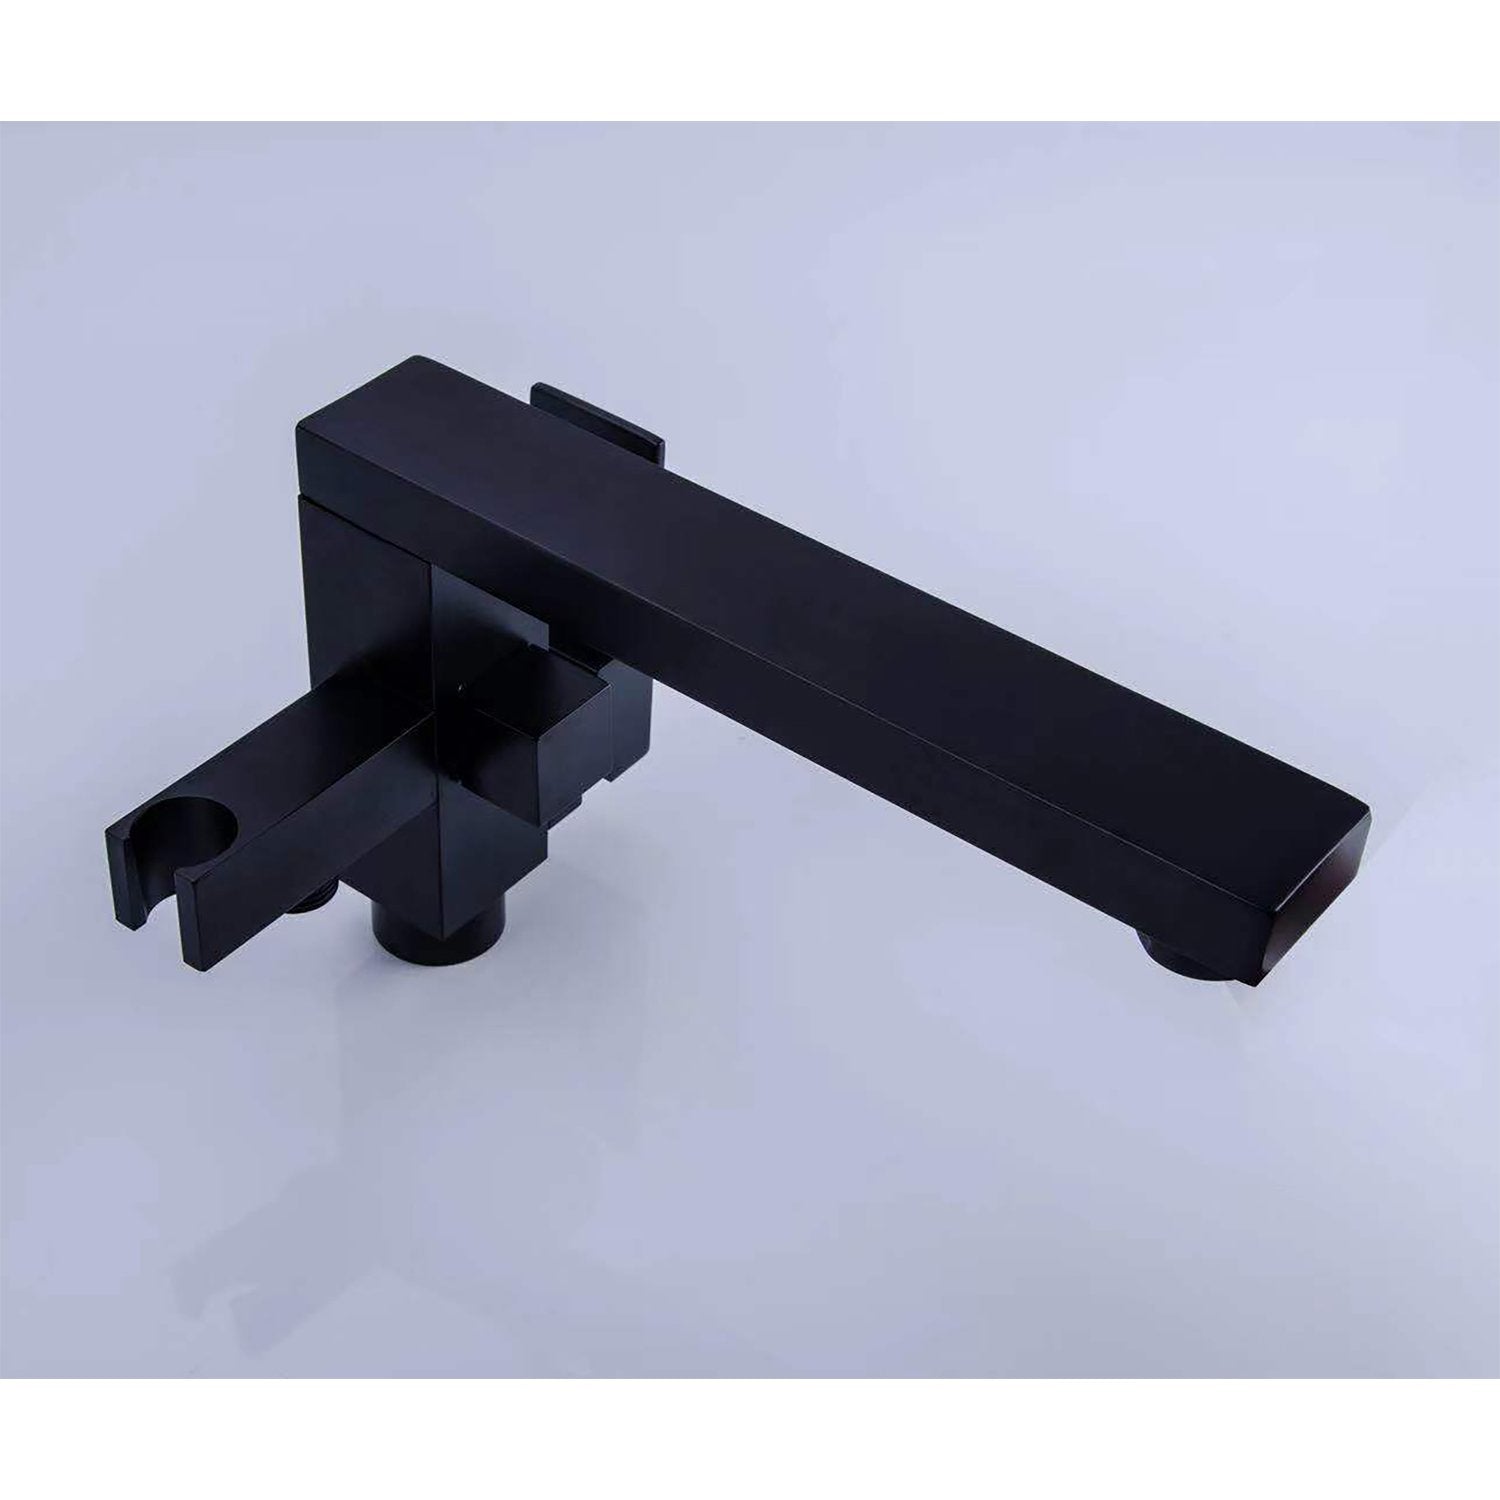 2-Handle Claw Foot Freestanding Tub Faucet with Hand Shower Floor Mount Bathtub Faucet in Matte Black - Alipuinc